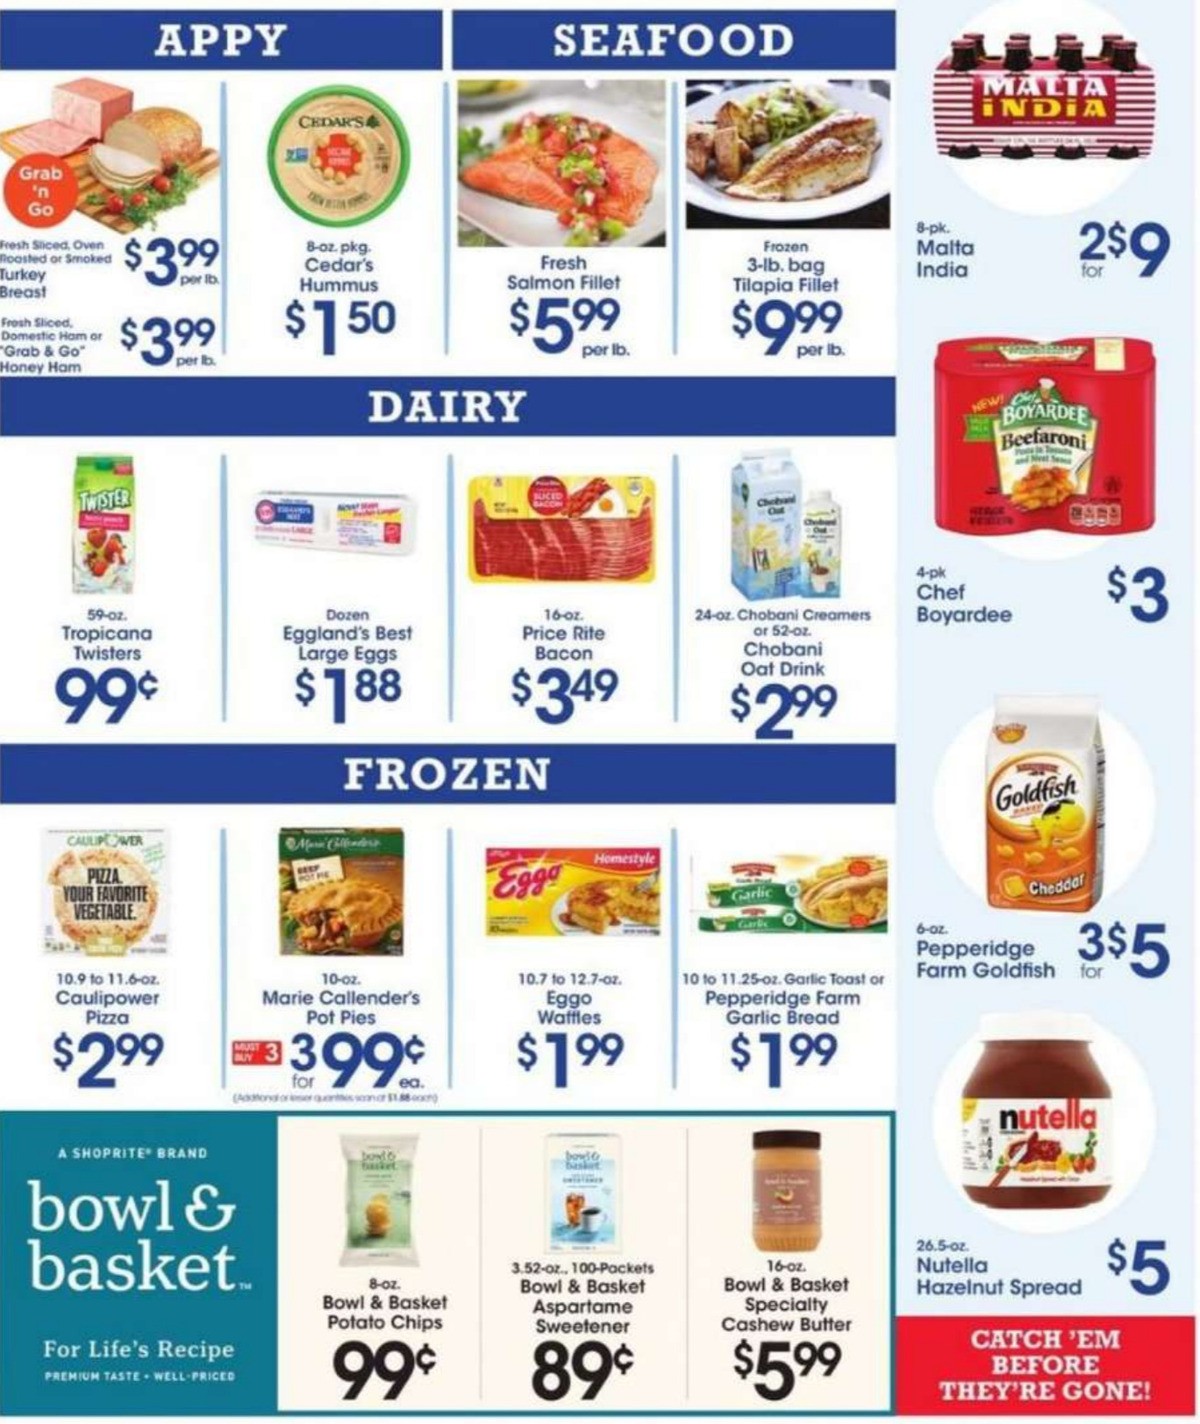 Price Rite Weekly Ad from January 1